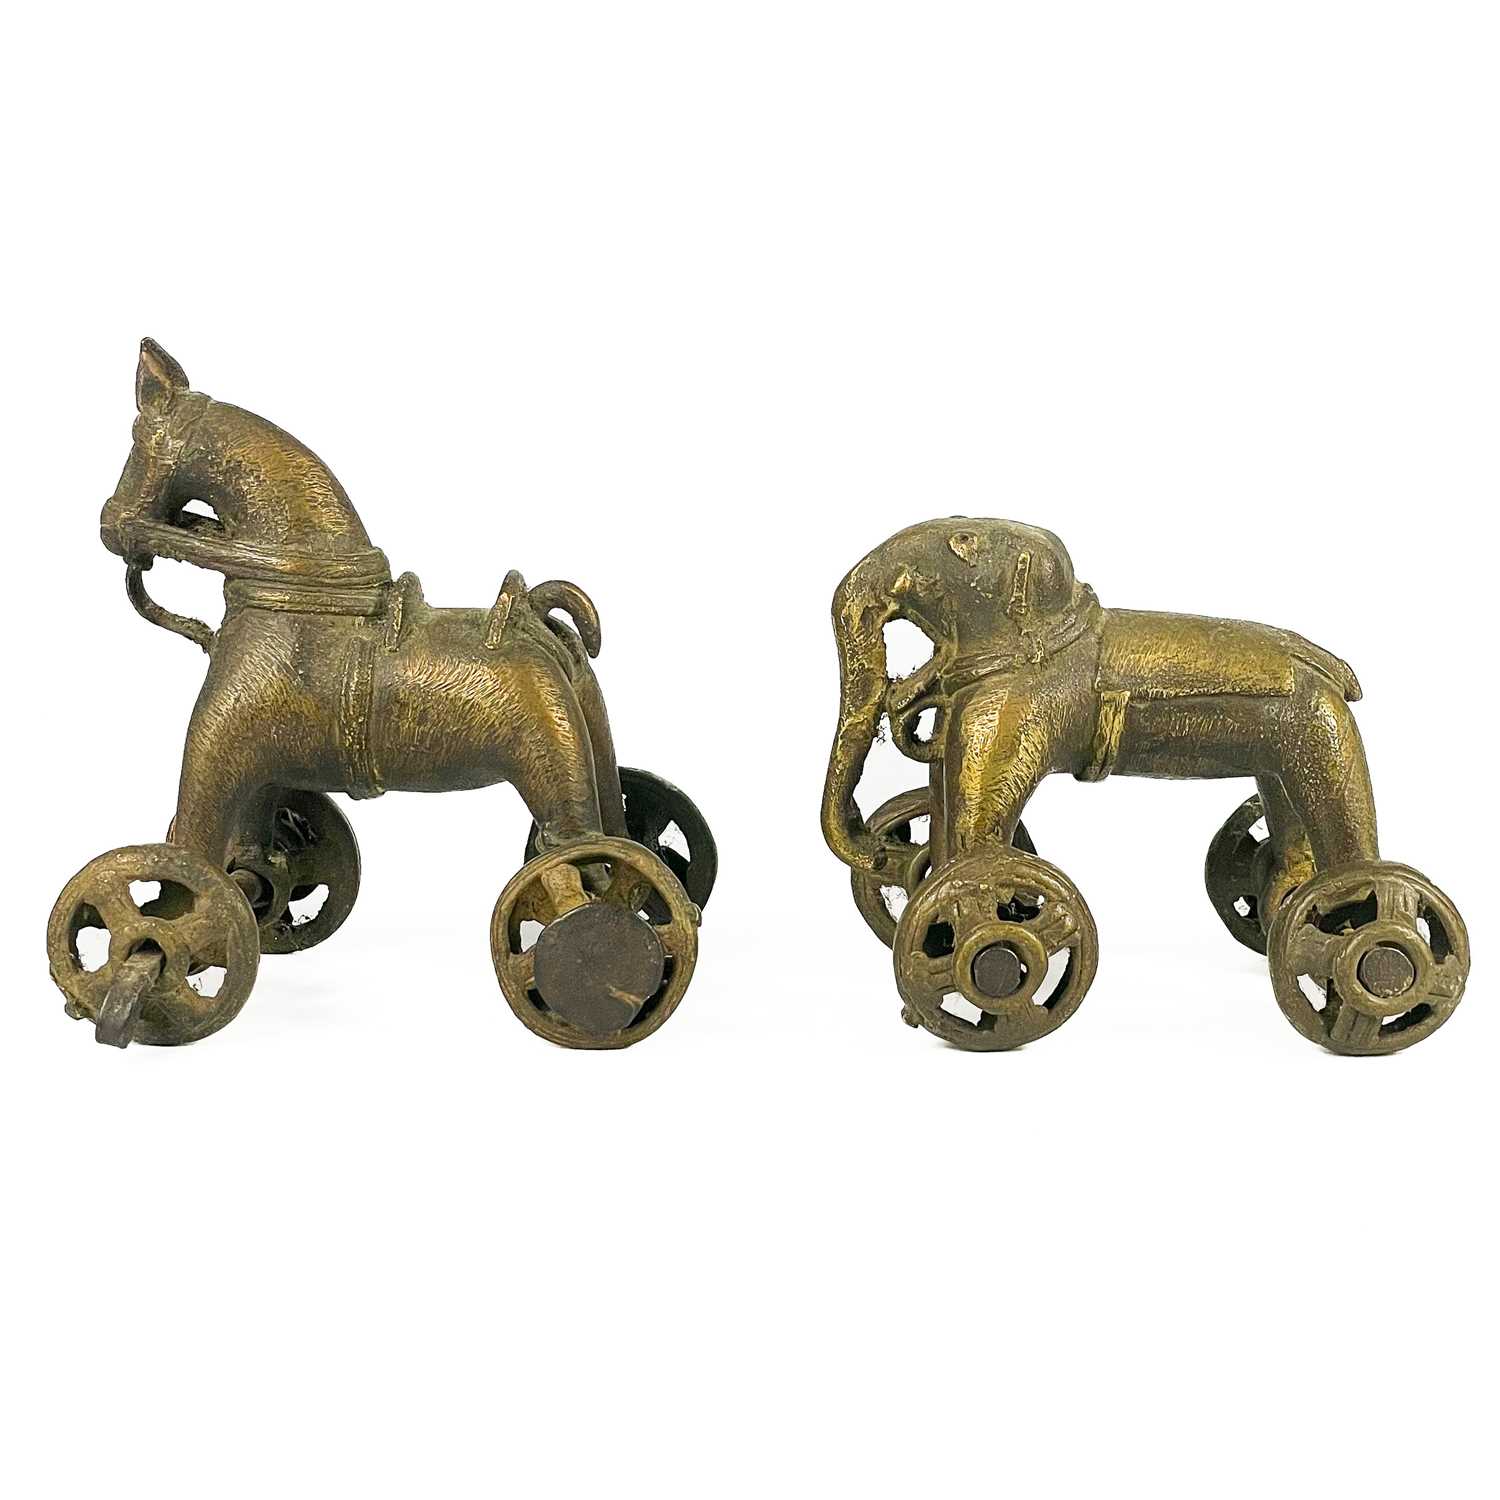 Two Indian bronze temple toys, circa 1900. - Image 4 of 4